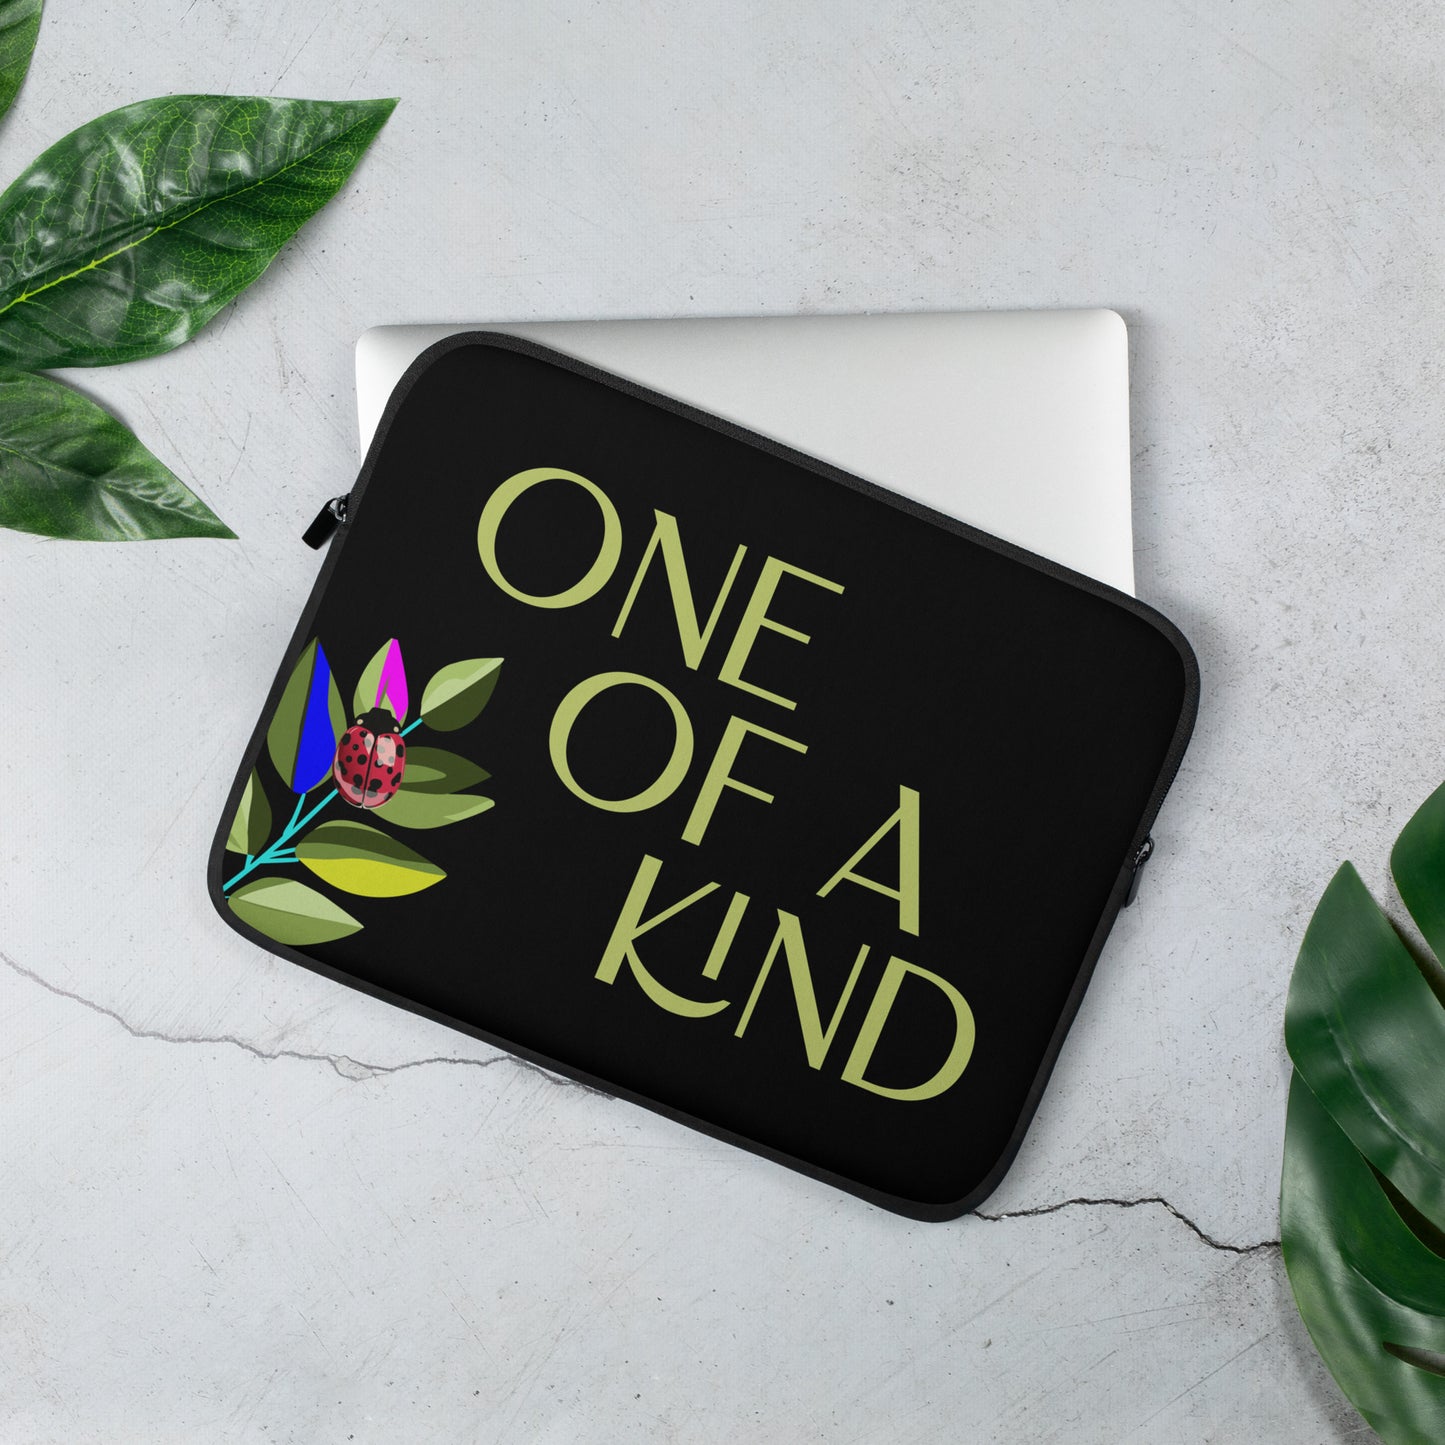 One of a Kind Laptop Sleeve